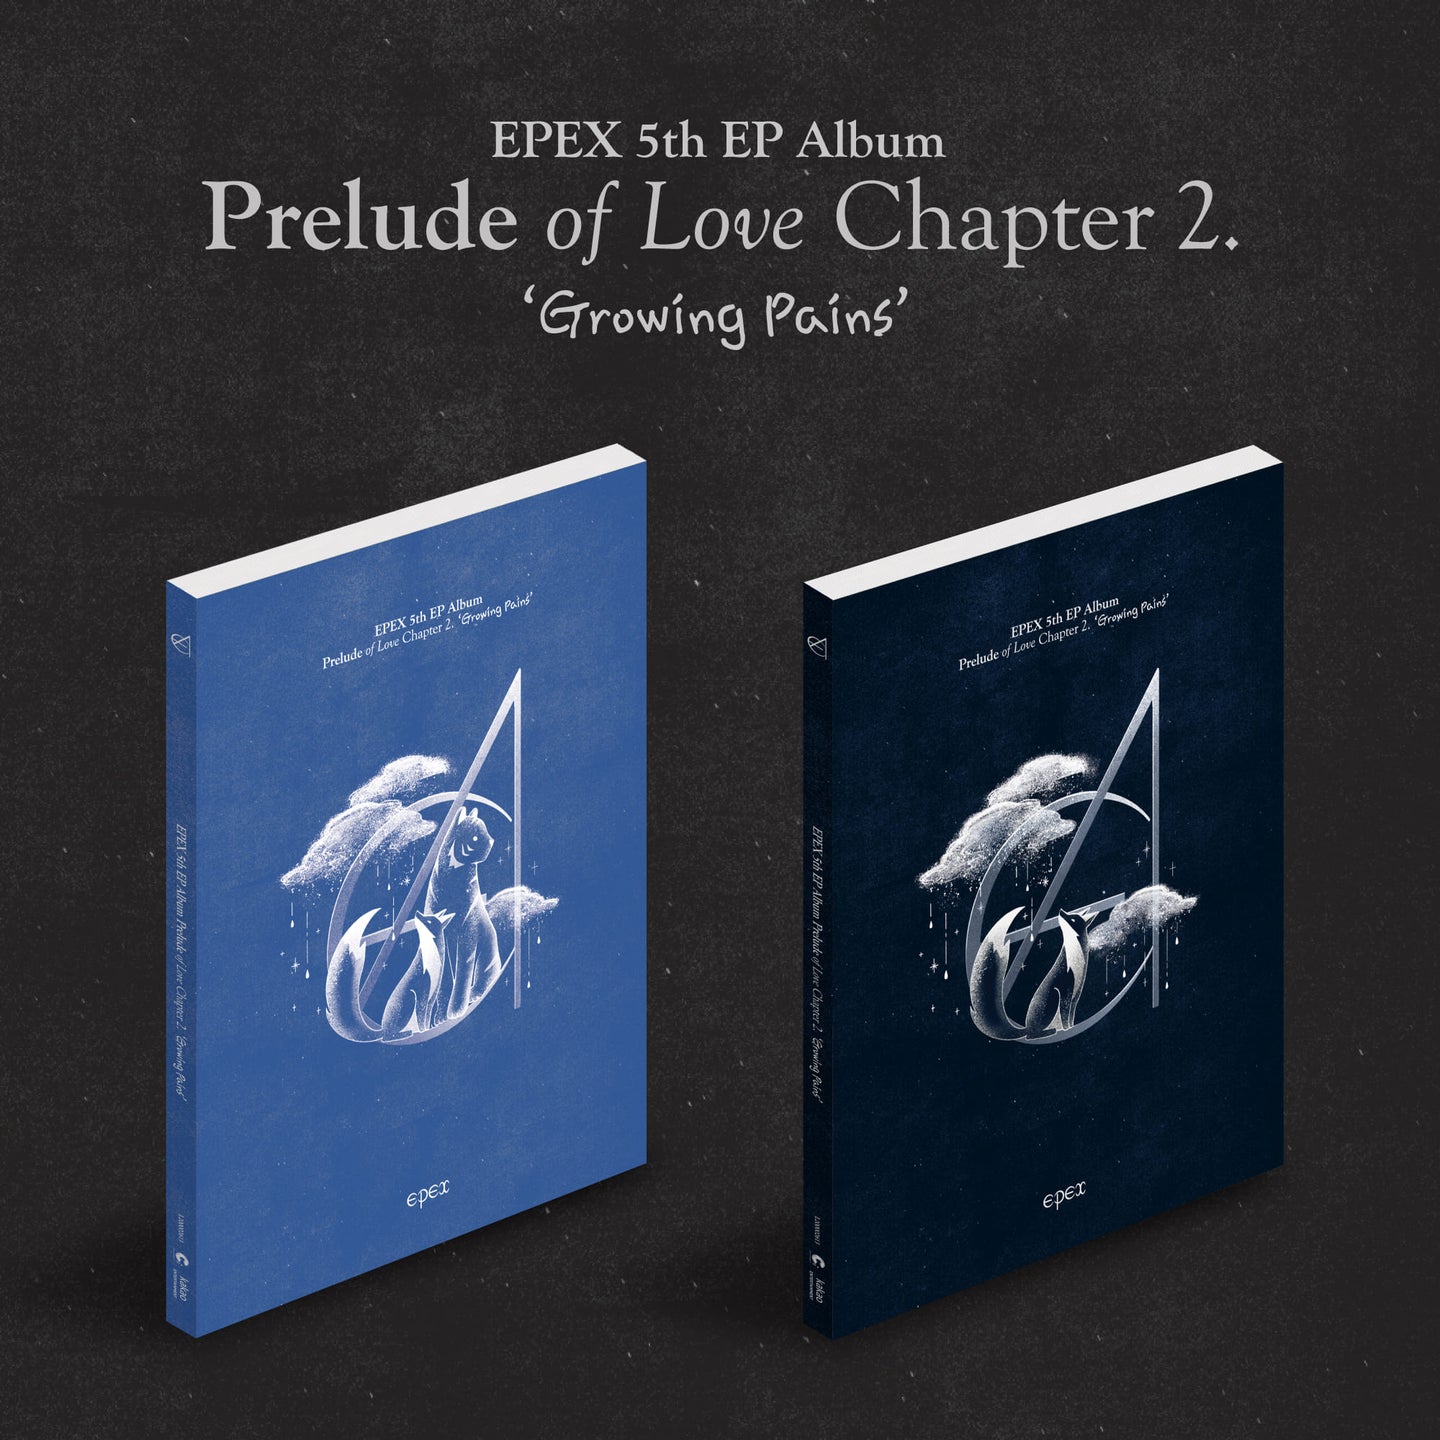 EPEX 5th EP Album - Prelude of Love Chapter 2. 'Growing Pains' (Random)